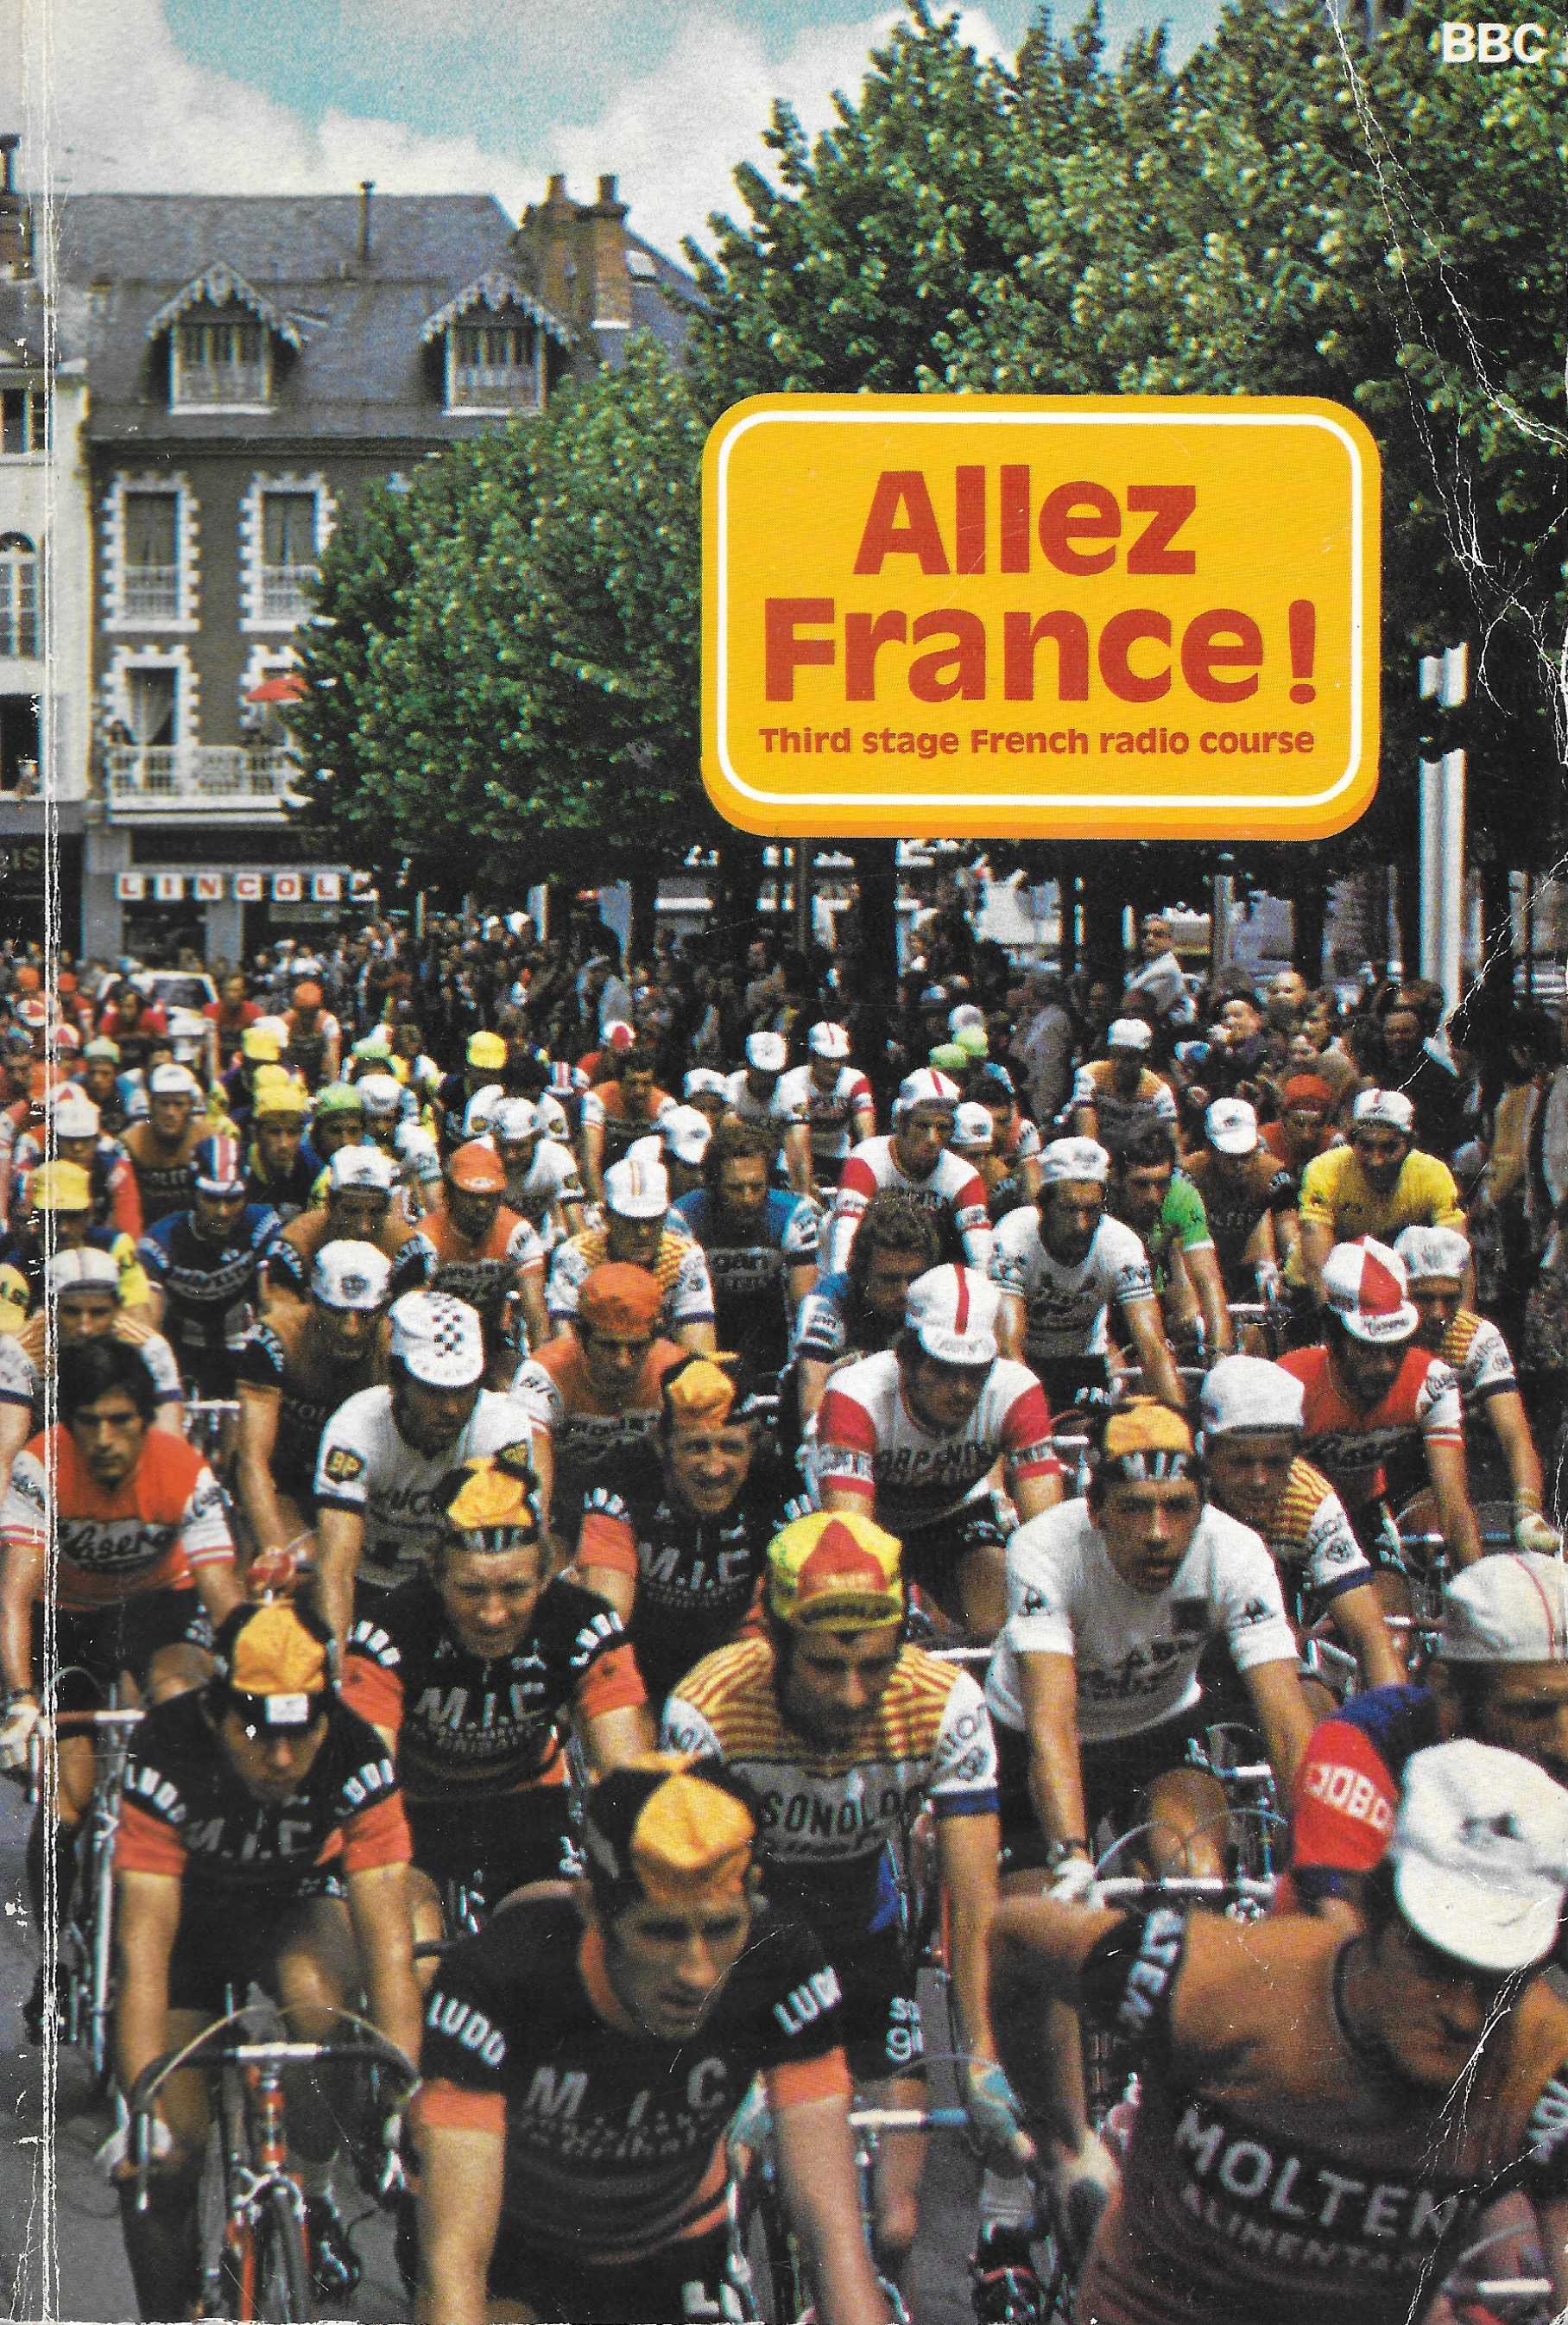 Picture of ISBN 0 563 16146 9 Allez France! Third stage French by artist John Ross from the BBC books - Records and Tapes library